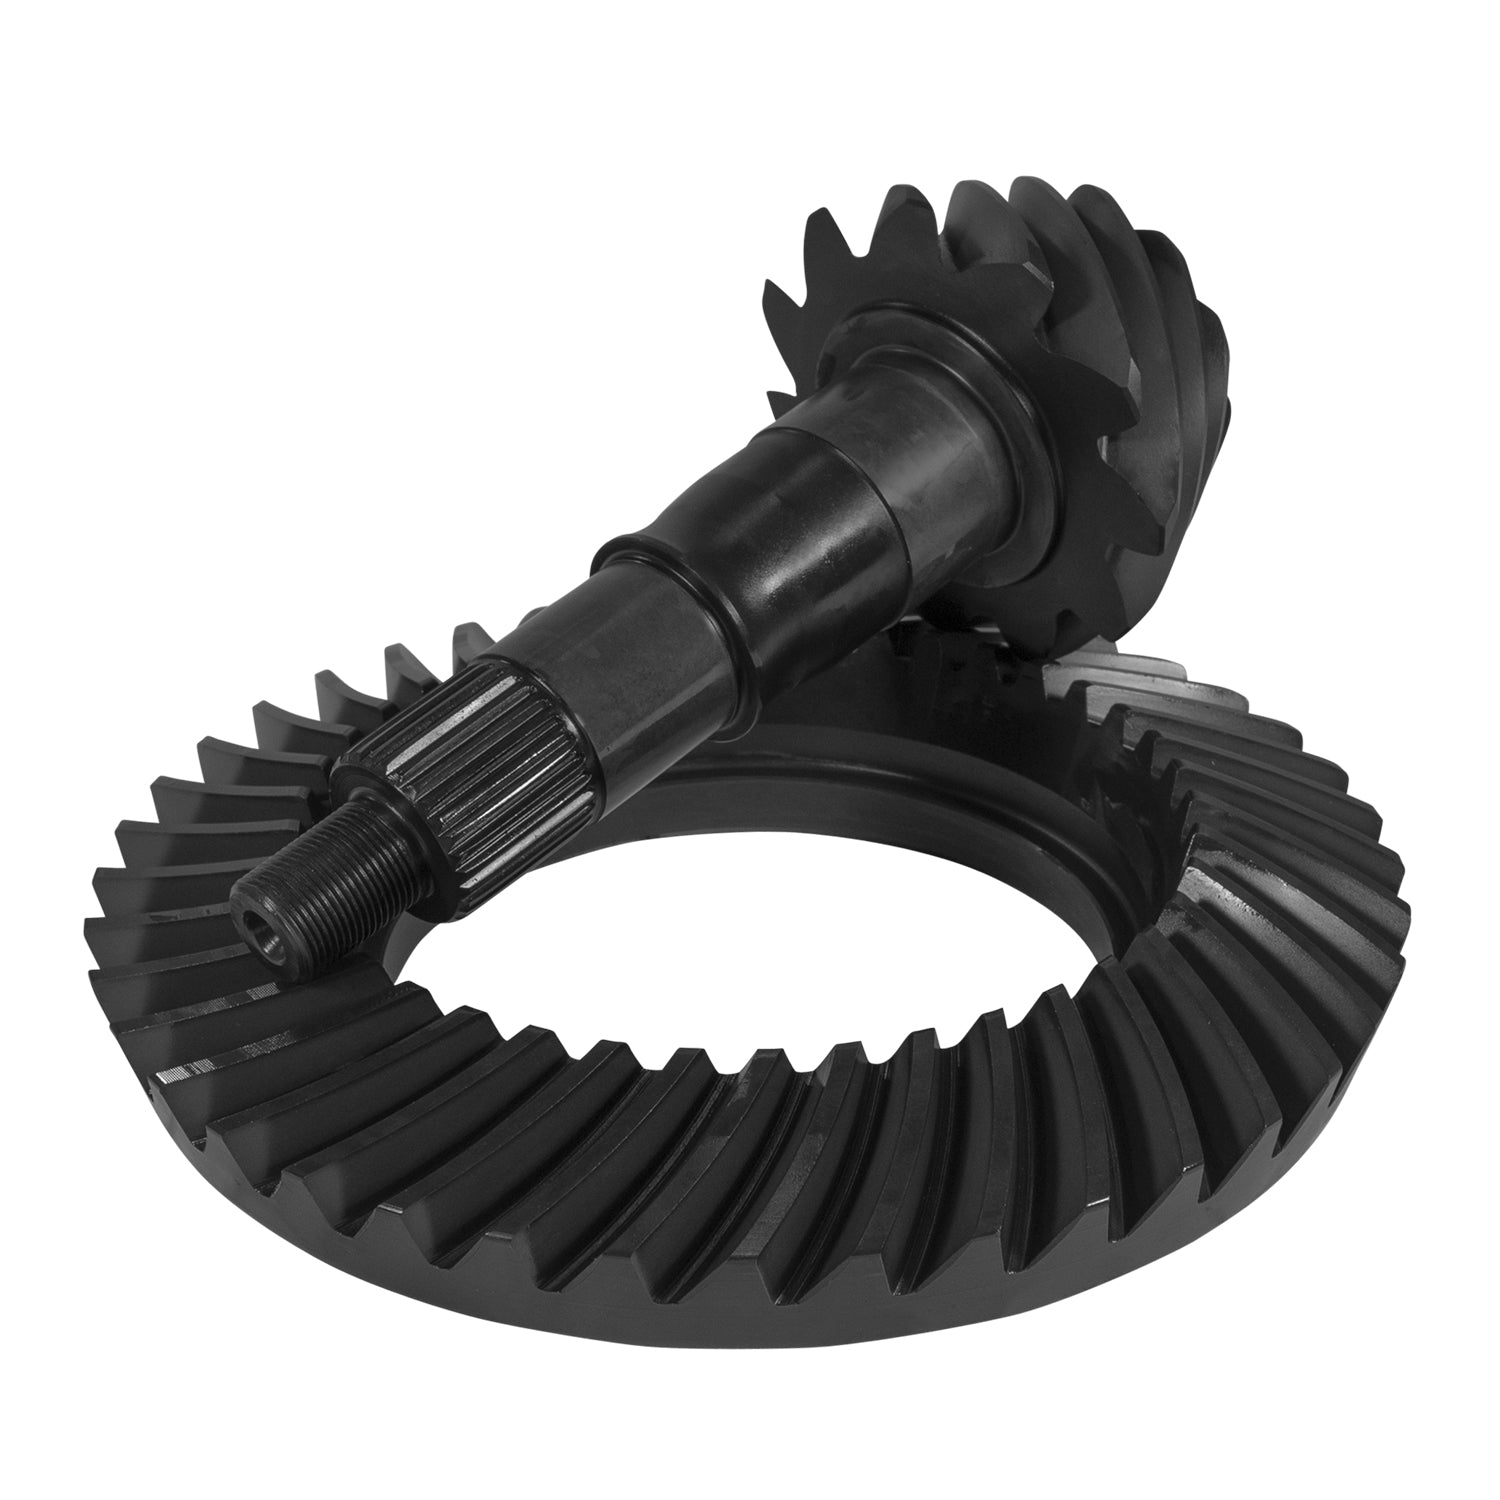 Yukon Gear Ford Lincoln Mercury Differential Ring and Pinion Kit - Rear YGK2380